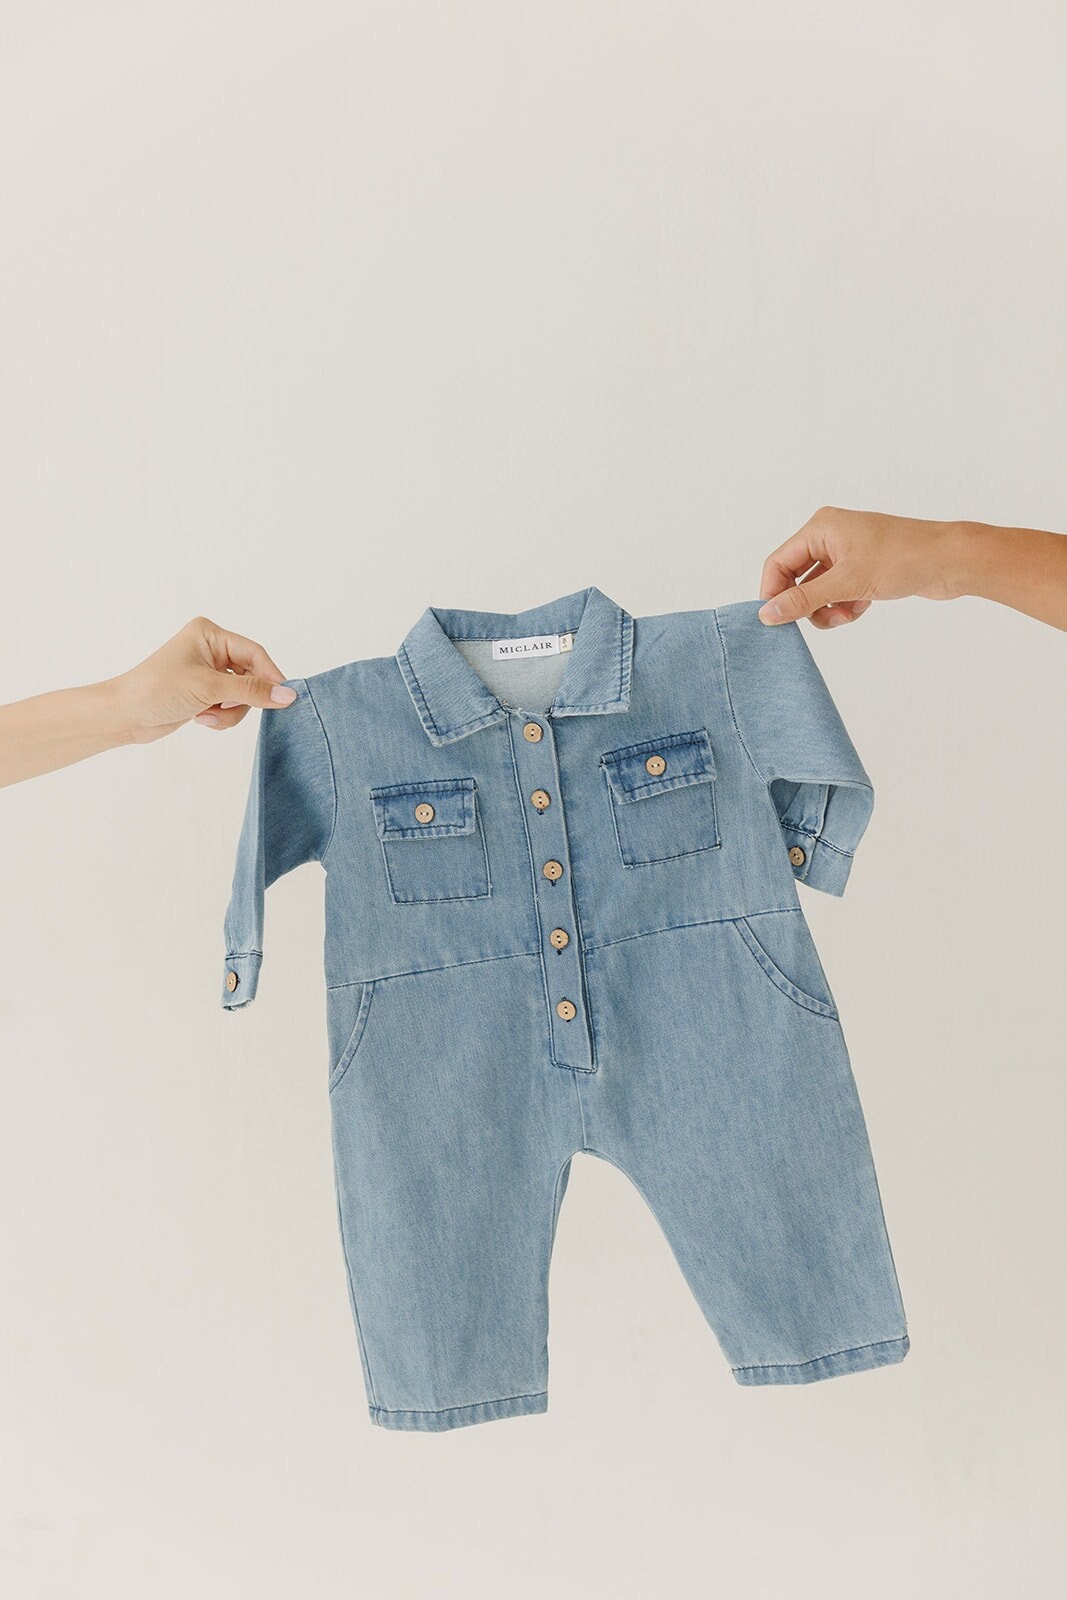 Stoned Immaculate Blue Jean Baby Denim Jumpsuit - ShopperBoard